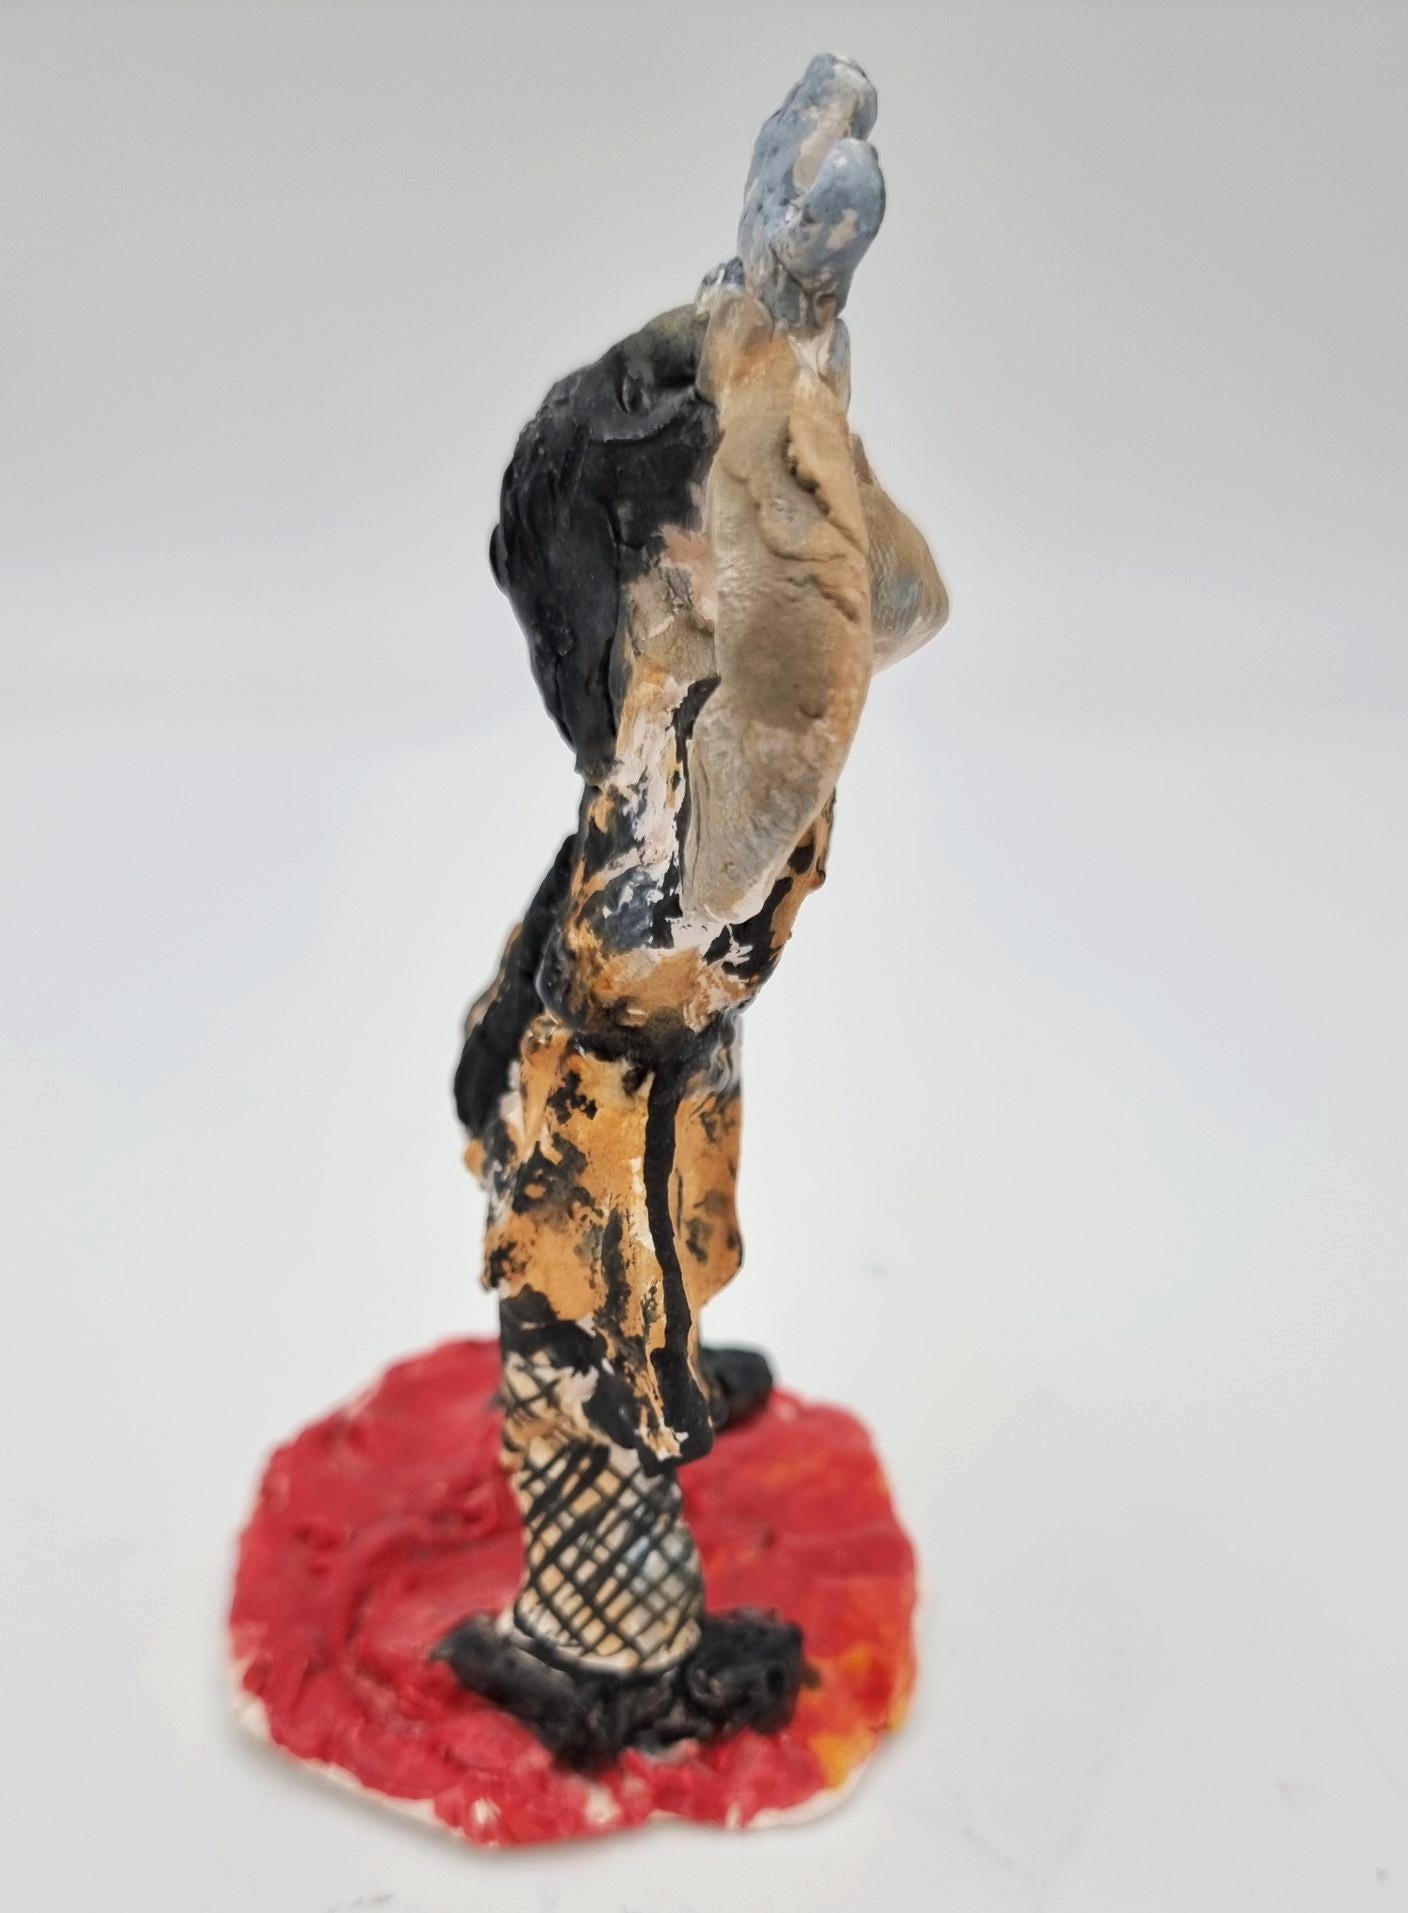 Ann Rothman
Sword Swallower (Circus, Whimsical, Viola Frey, Delicate, Playful, Fun, Cirque du Soleil, The Ringling Bros., Barnum & Bailey) 
2022
Porcelain, Low Fire Glazes, Crayons, Watercolors
Fired Cone 06, 04
5.5 x 3.5 x 3 inches
COA